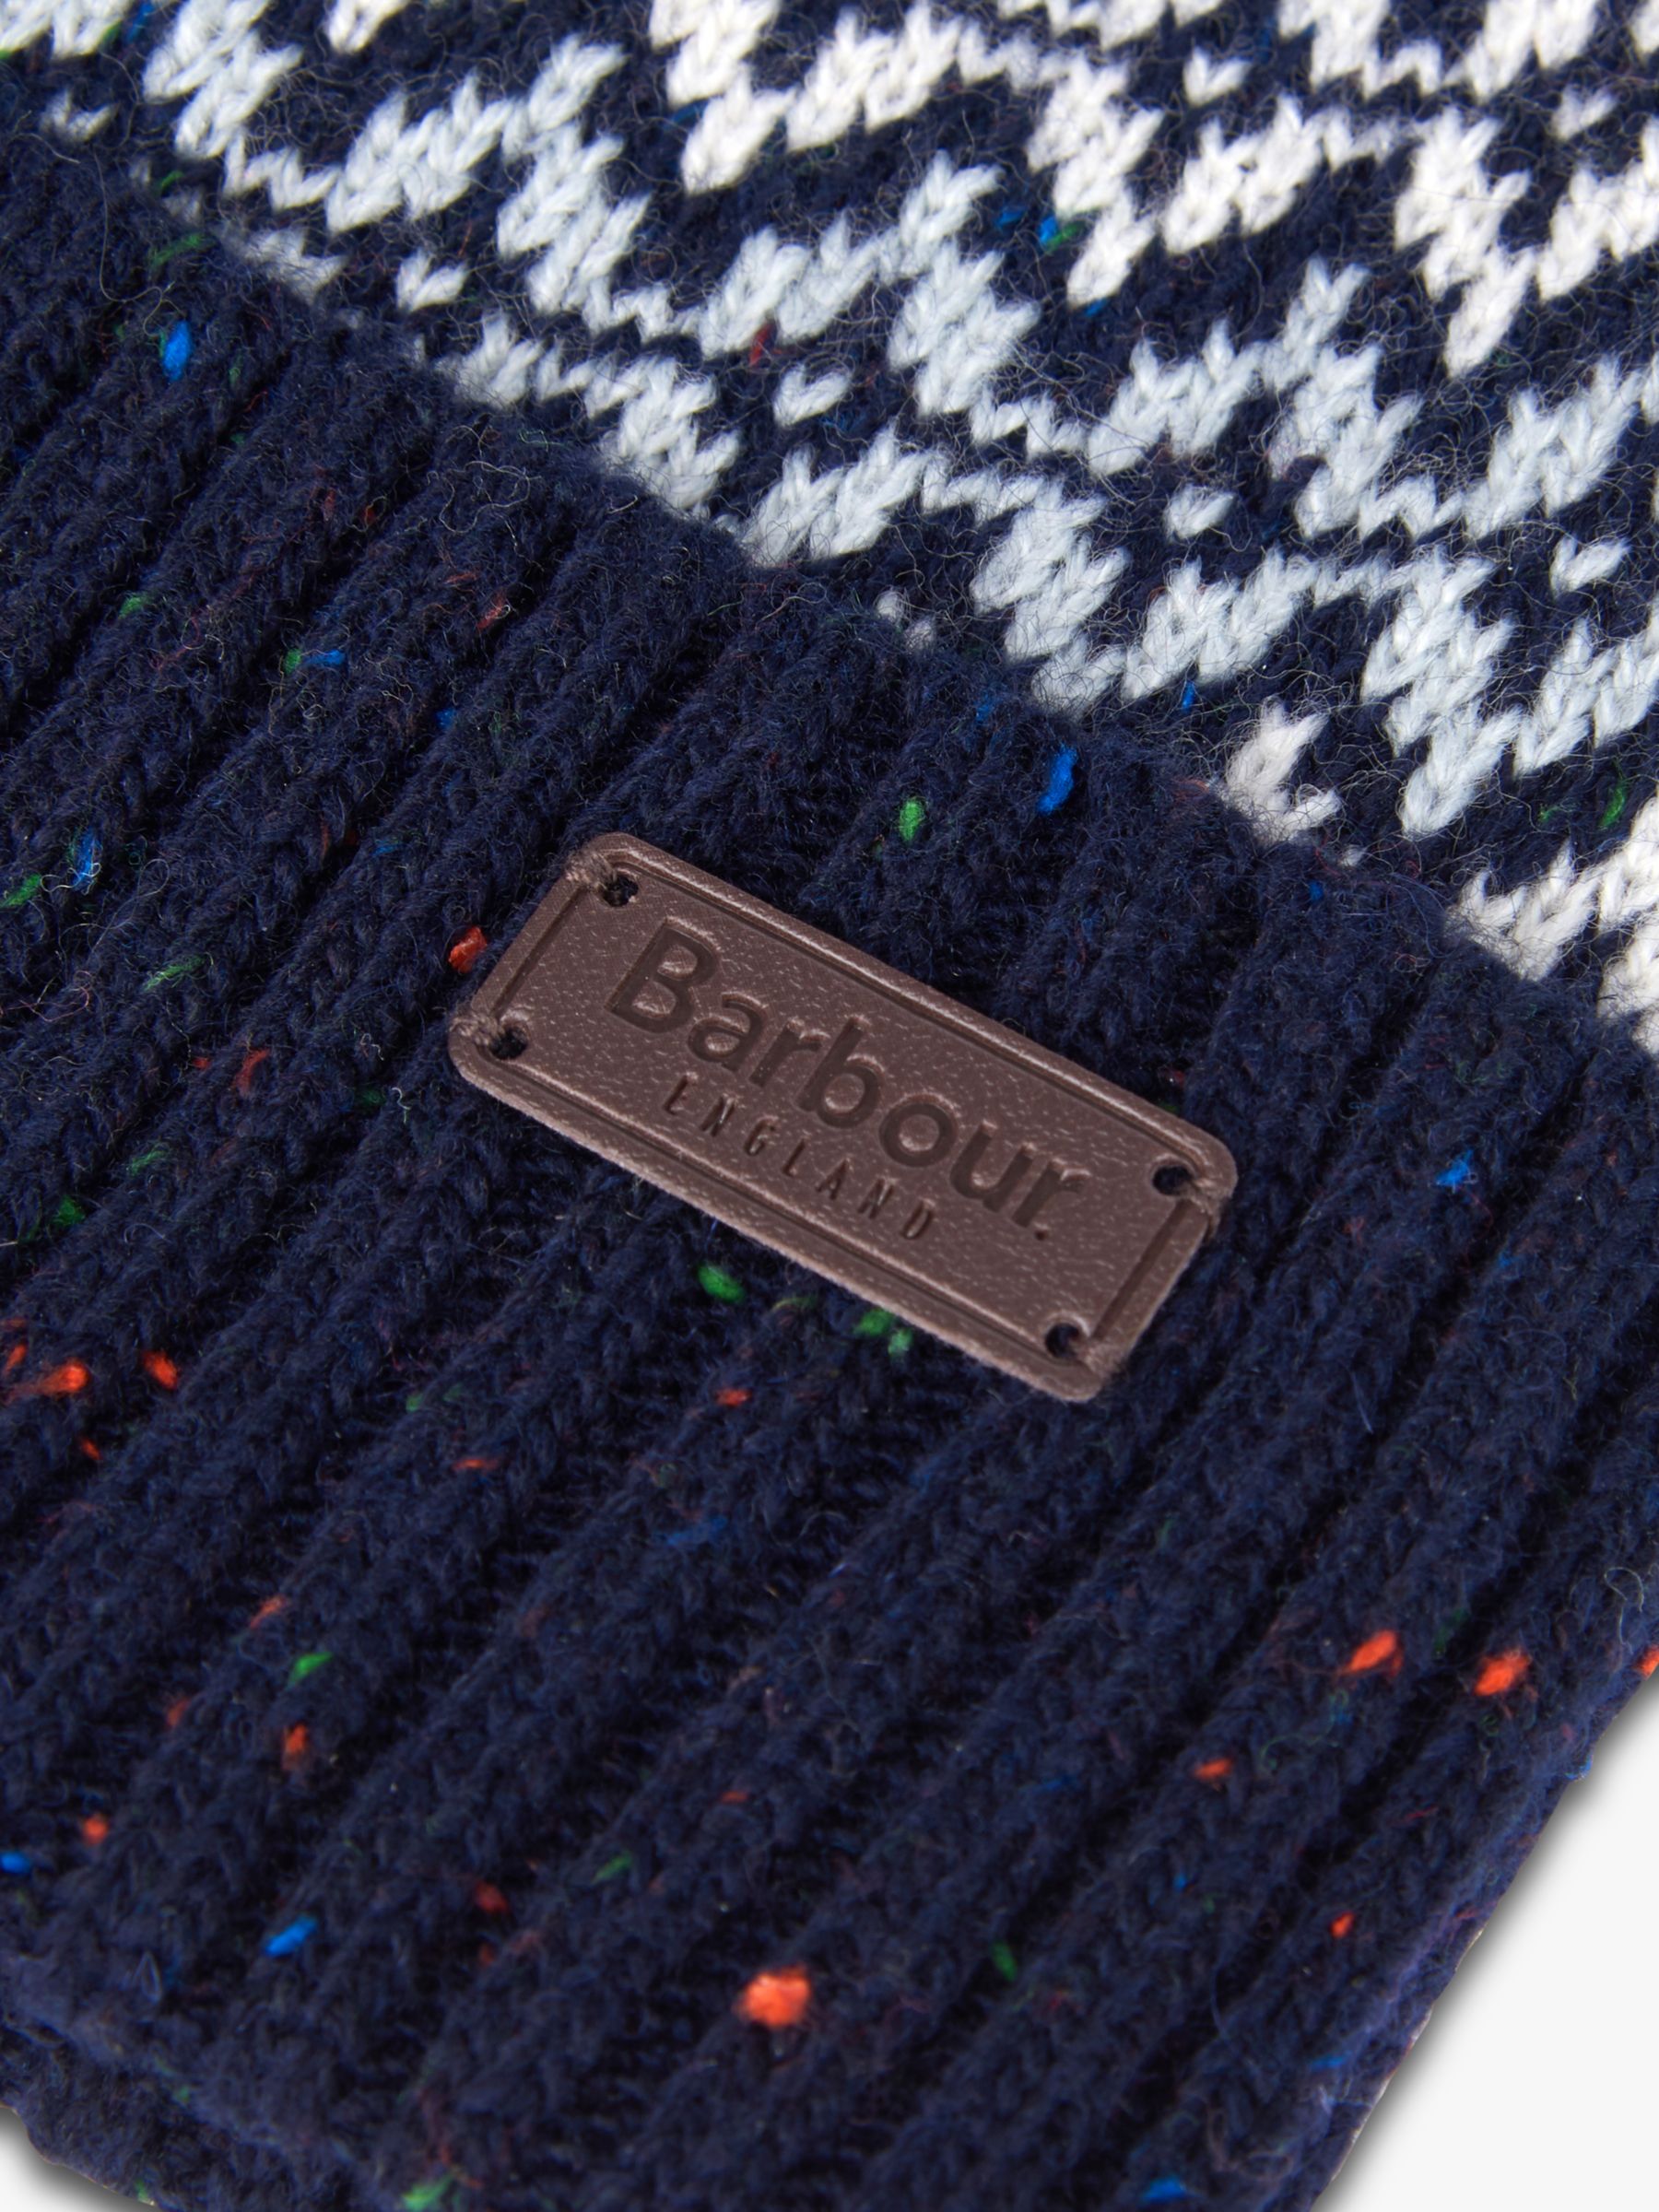 barbour hat and scarf set